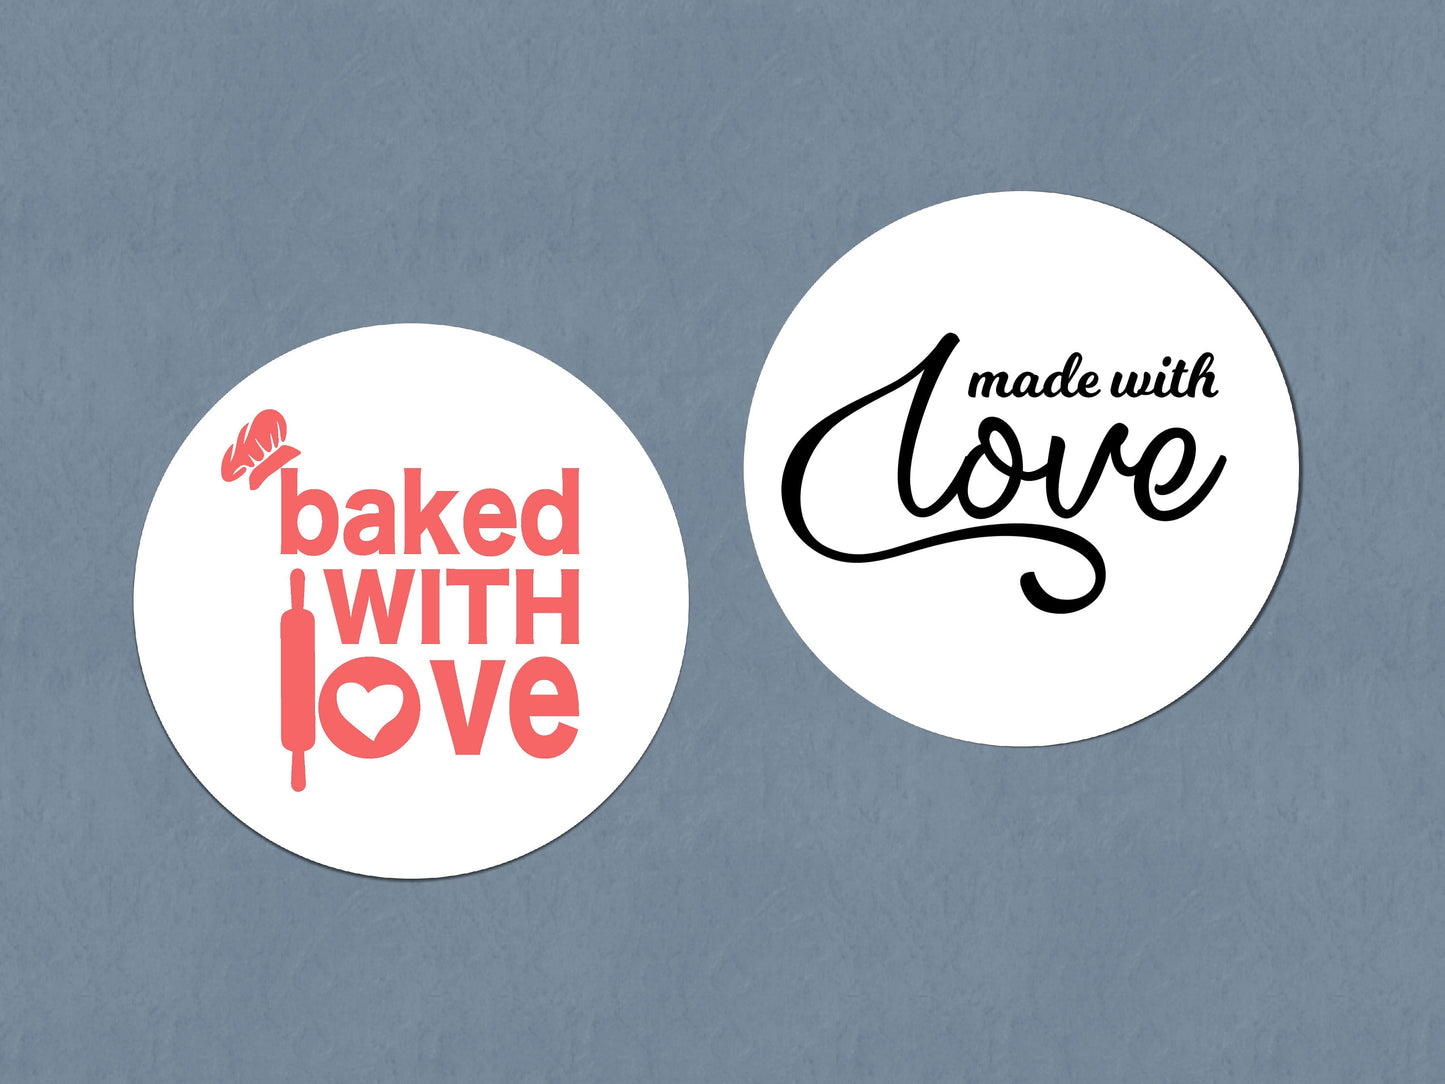 Business Stickers | Sticker Sheet | Made With Love Stickers | Baked With Love Stickers